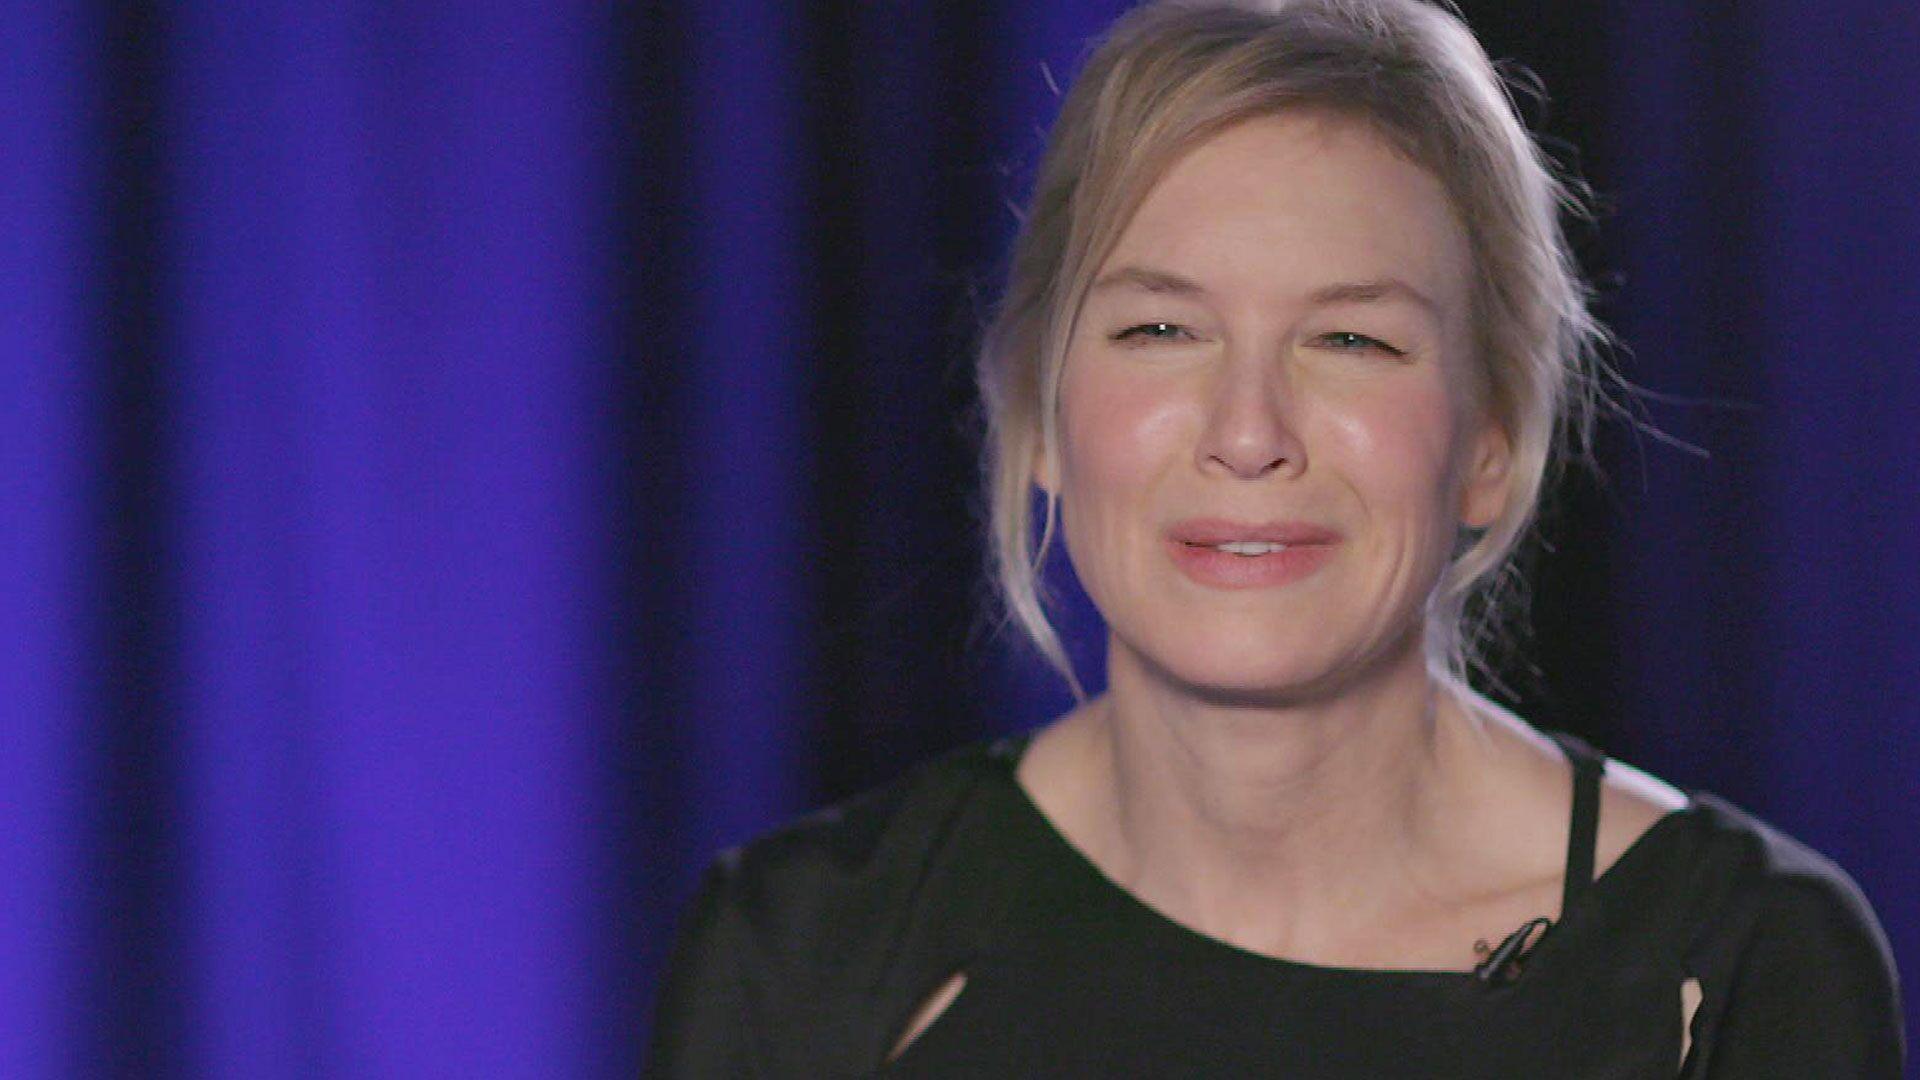 Renee Zellweger on the 'Life Blessing' of Transforming Into